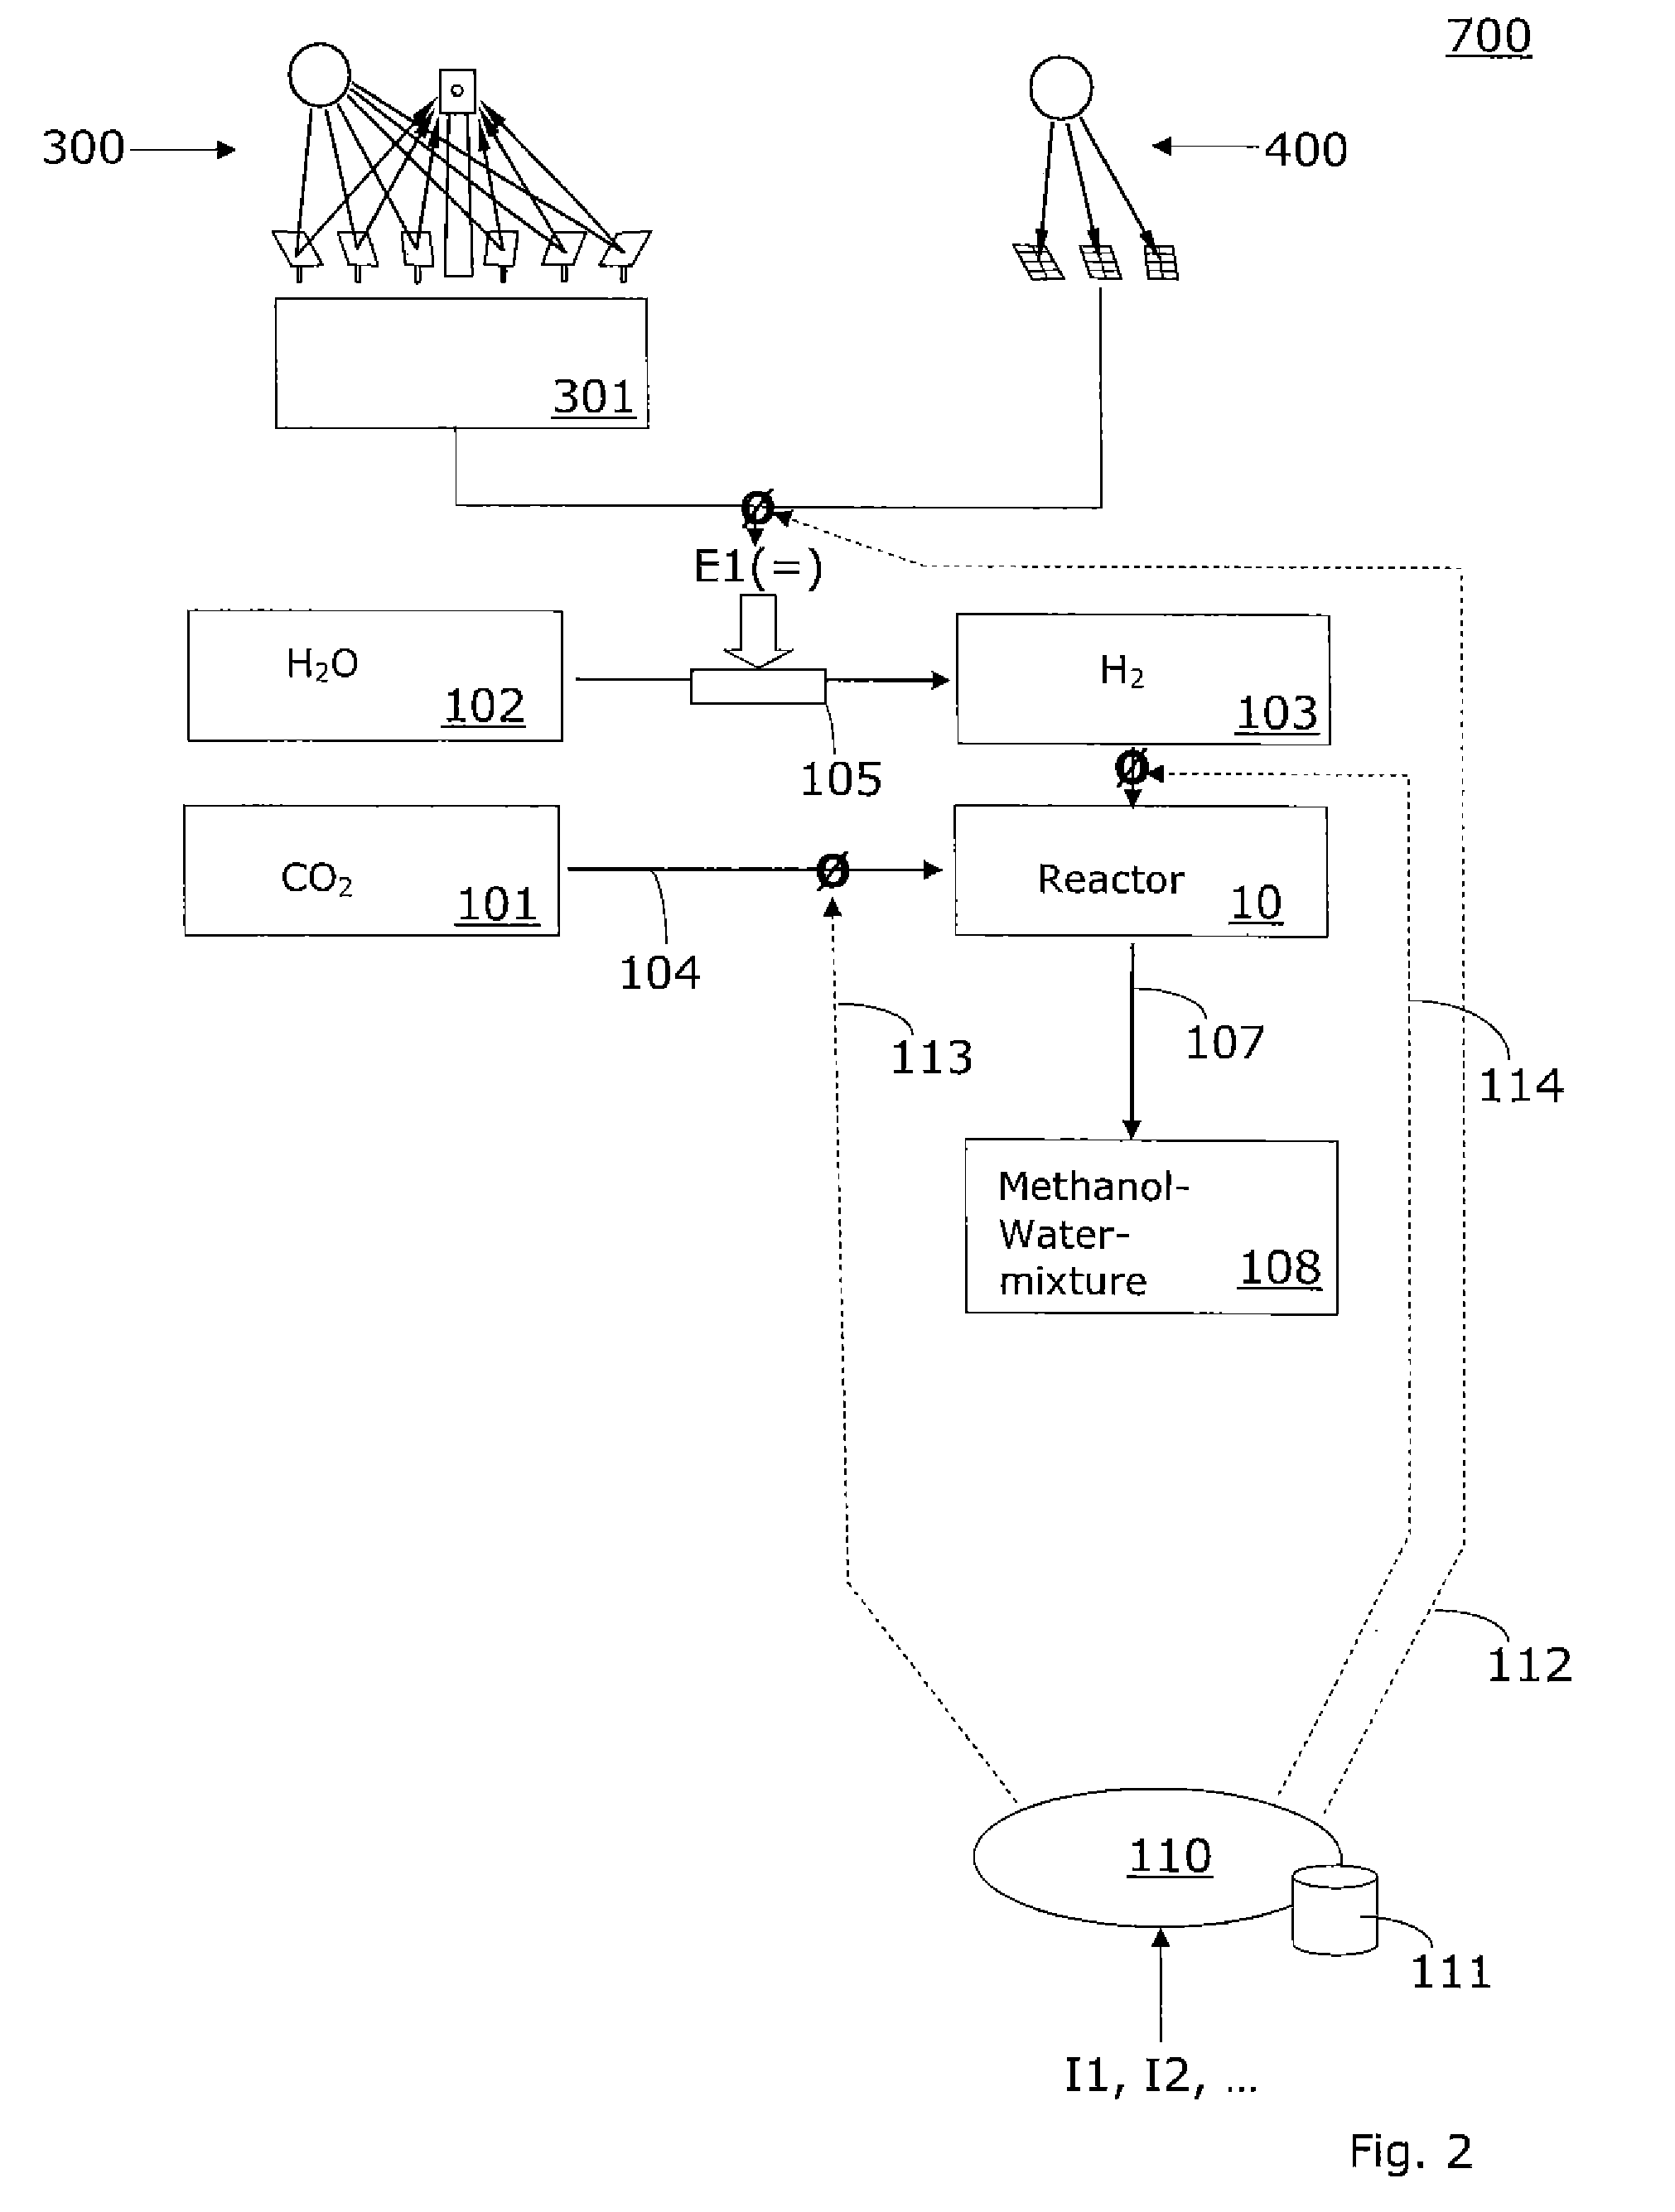 Method for providing and using an alcohol and use of the alcohol for increasing the efficiency and performance of an internal combustion engine